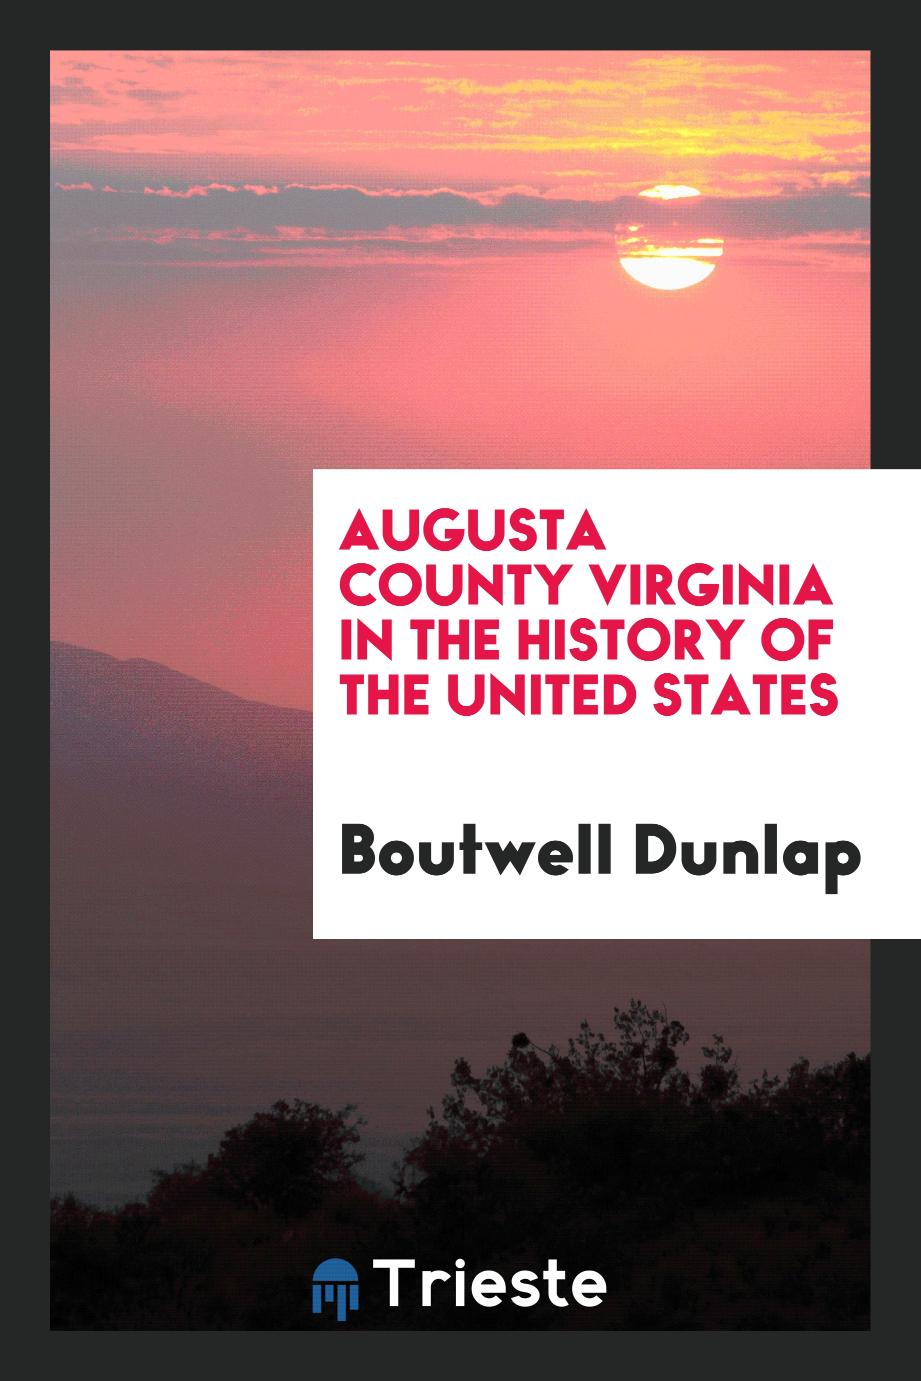 Augusta County Virginia in the History of the United States